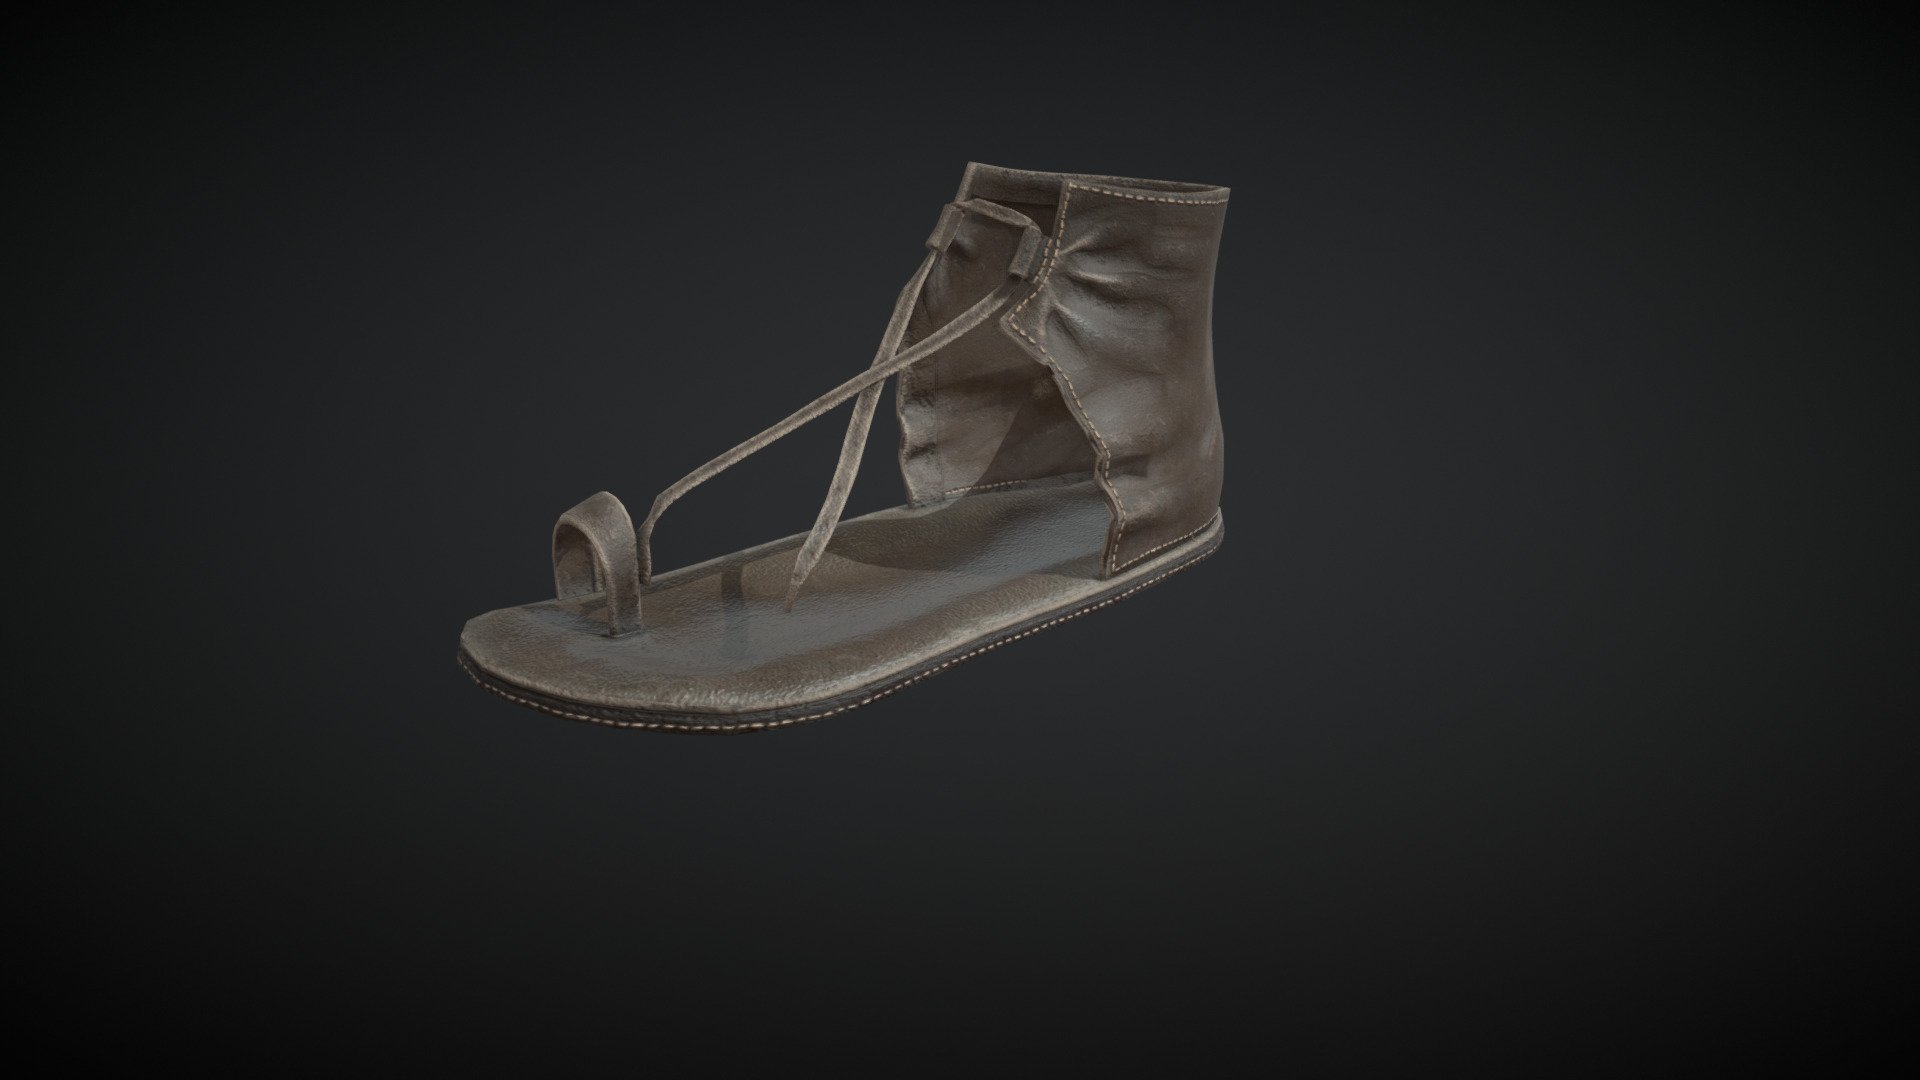 This shoe is an asset made for a project I am working on, for a character named &ldquo;Azur